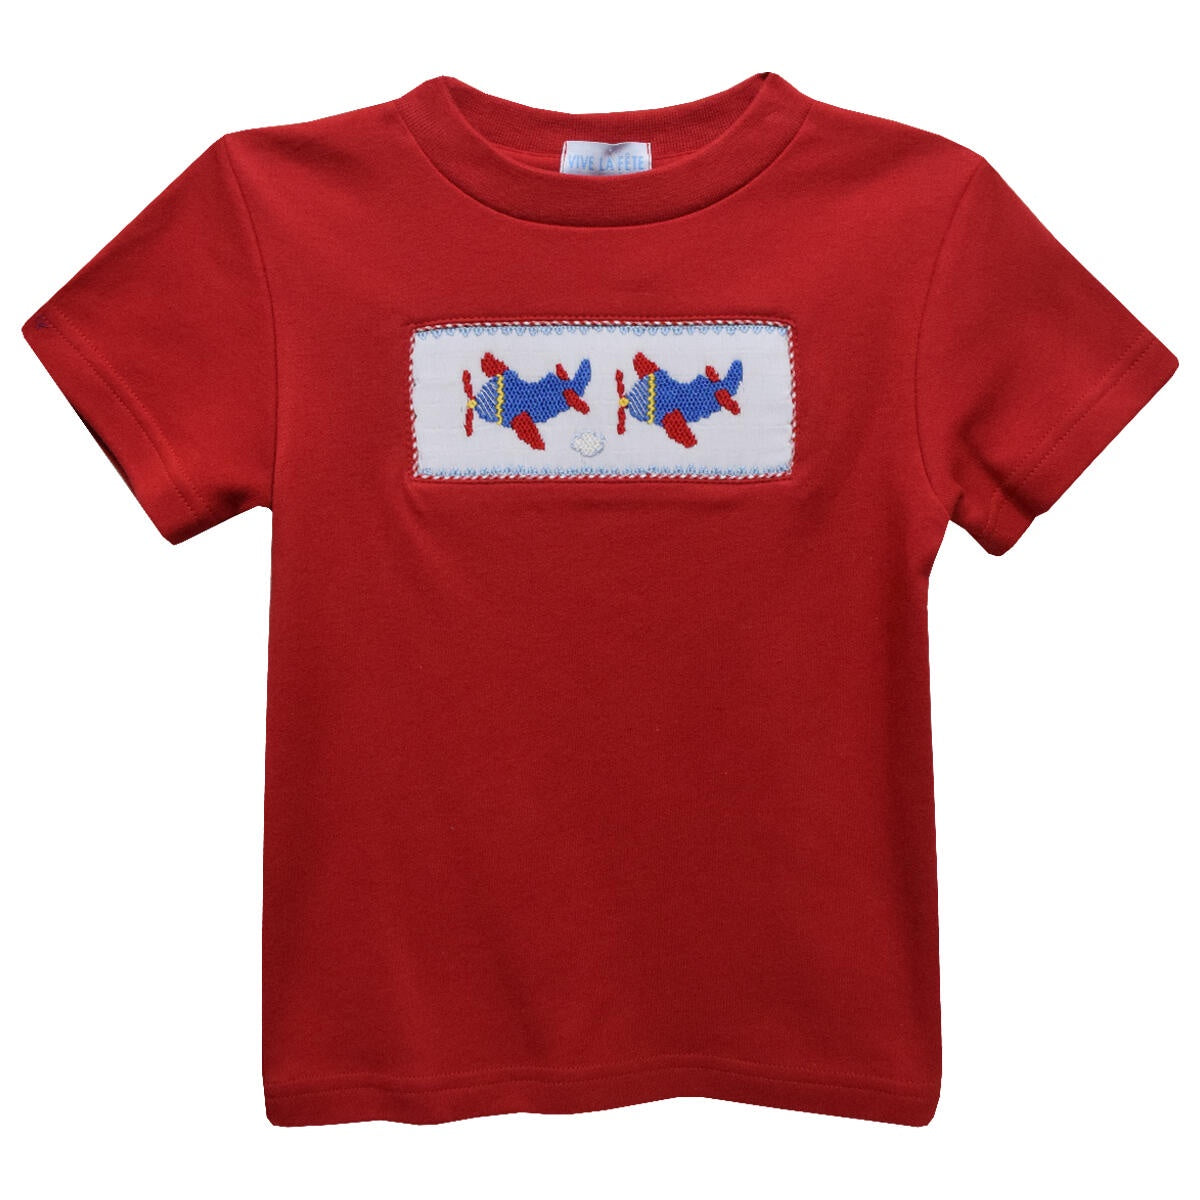 Vive La Fete Airplane Smocked Red Knit Short Sleeve T-Shirt 5103